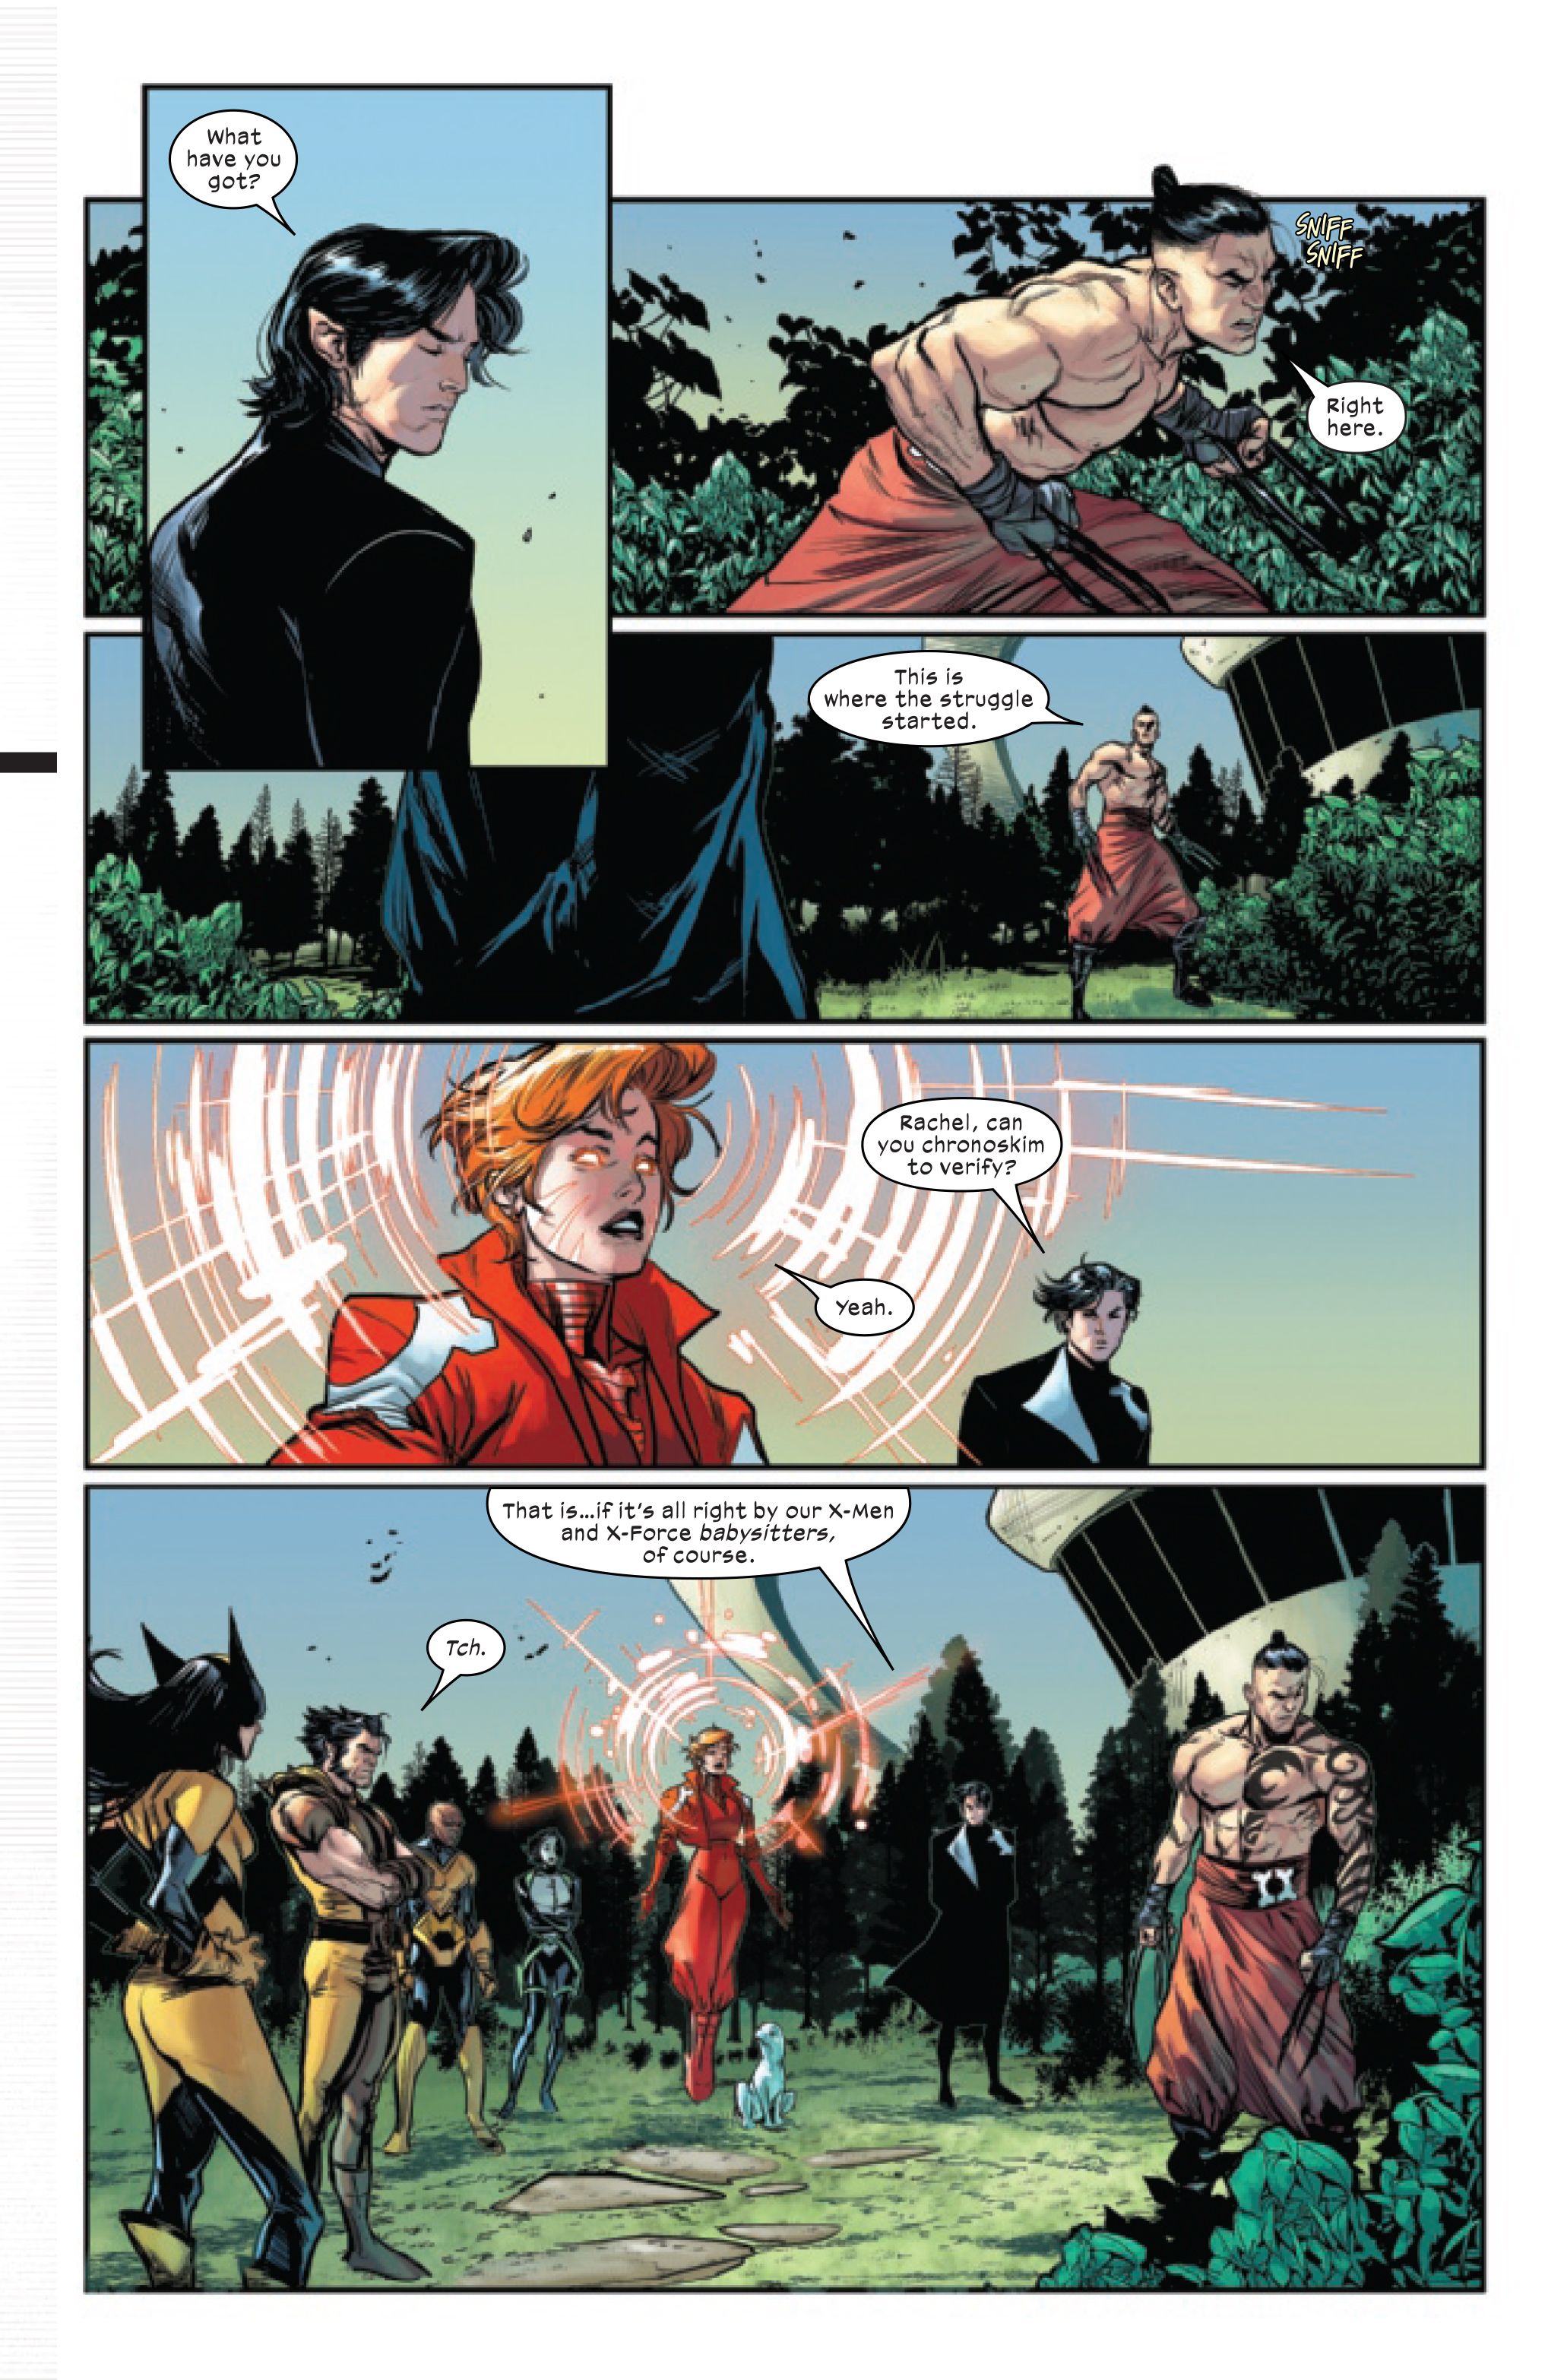 Page 1 of X-Men: The Trial of Magneto #1, by Leah Williams and Lucas Werneck. 